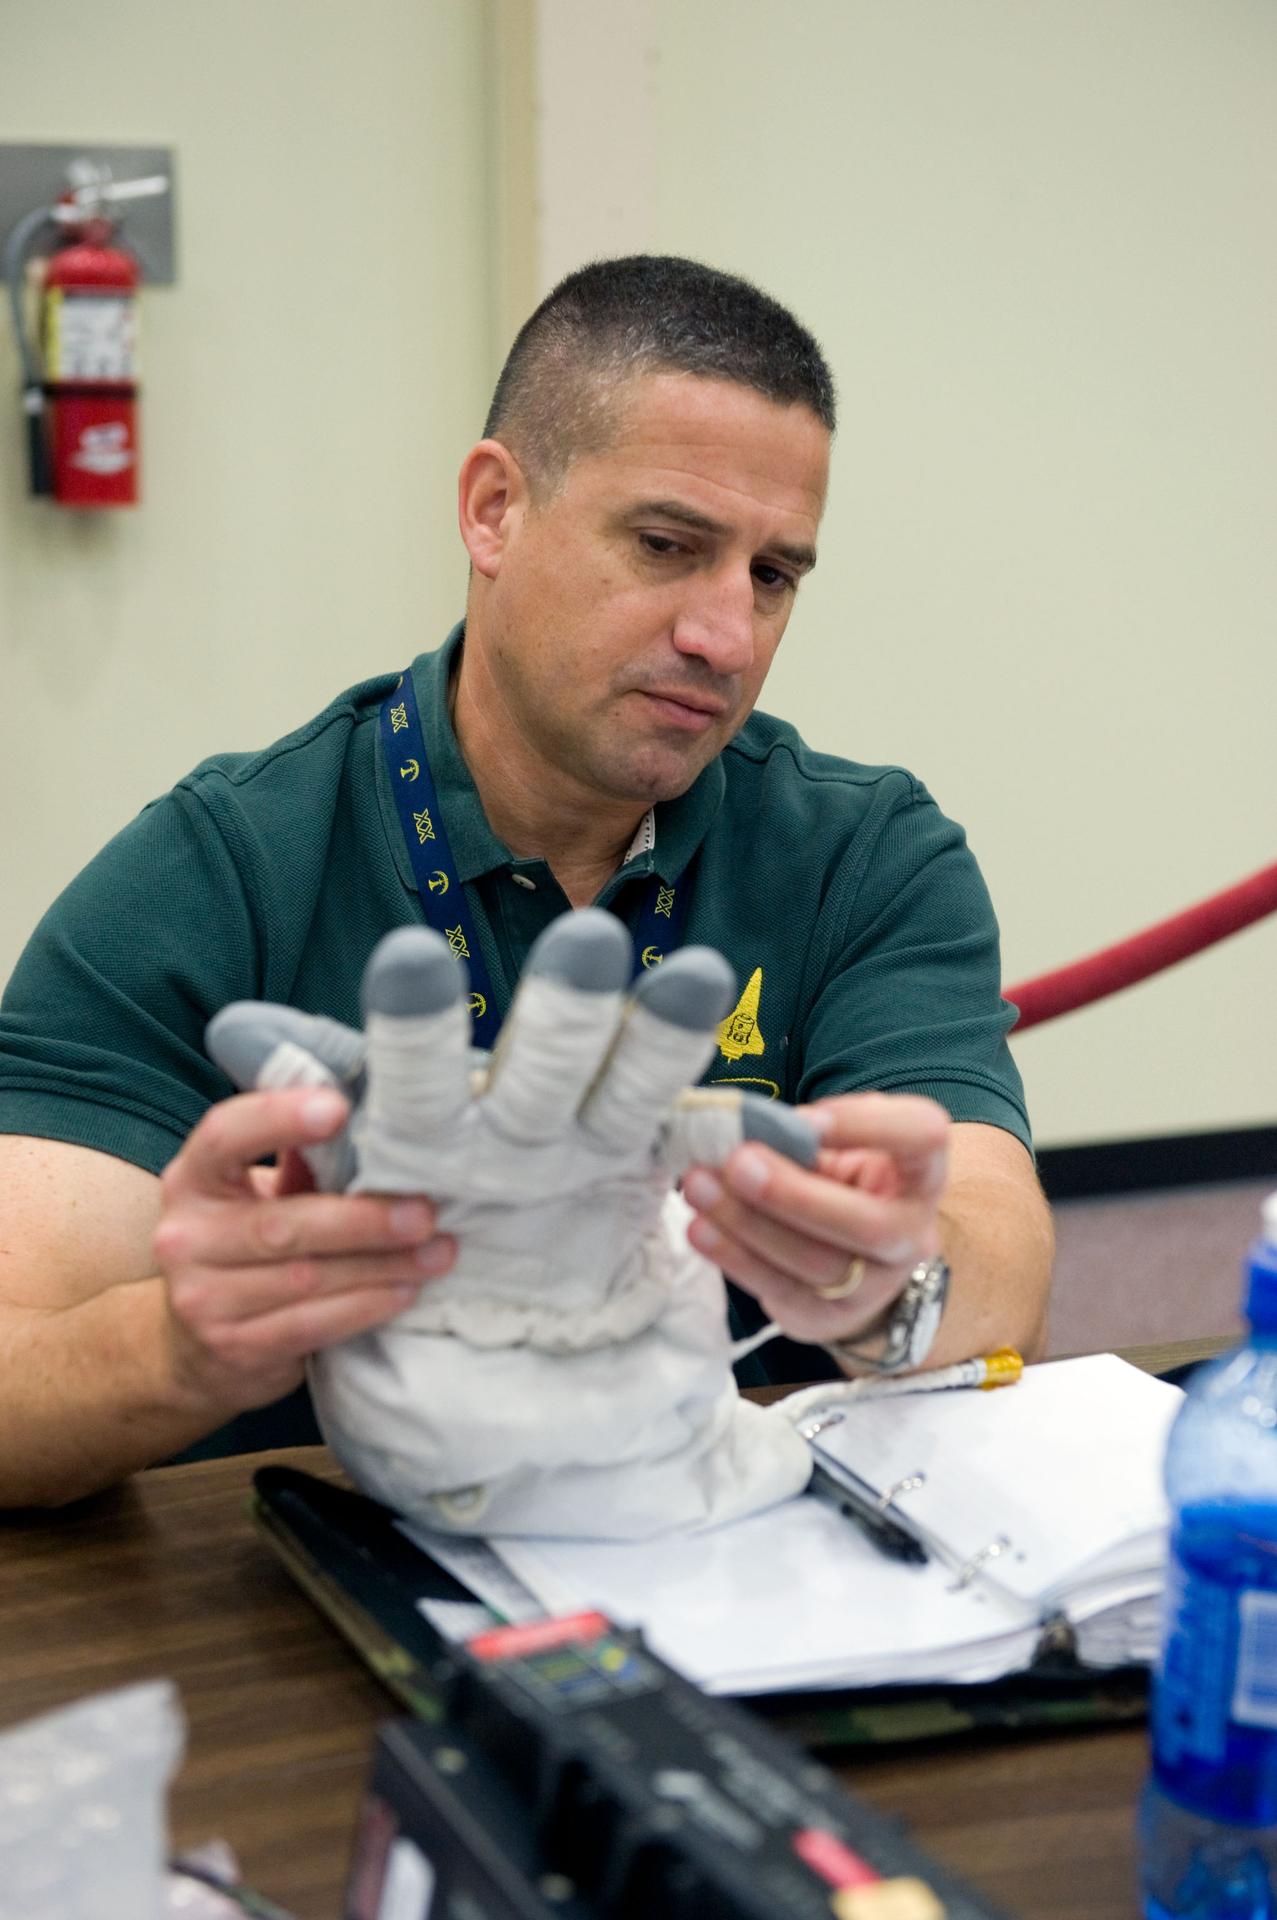 JSC2009-E-244194 (23 Nov. 2009) --- Astronaut George Zamka, STS-130 commander, examines an Extravehicular Mobility Unit (EMU) glove during a training session in the Space Vehicle Mockup Facility at NASA's Johnson Space Center.